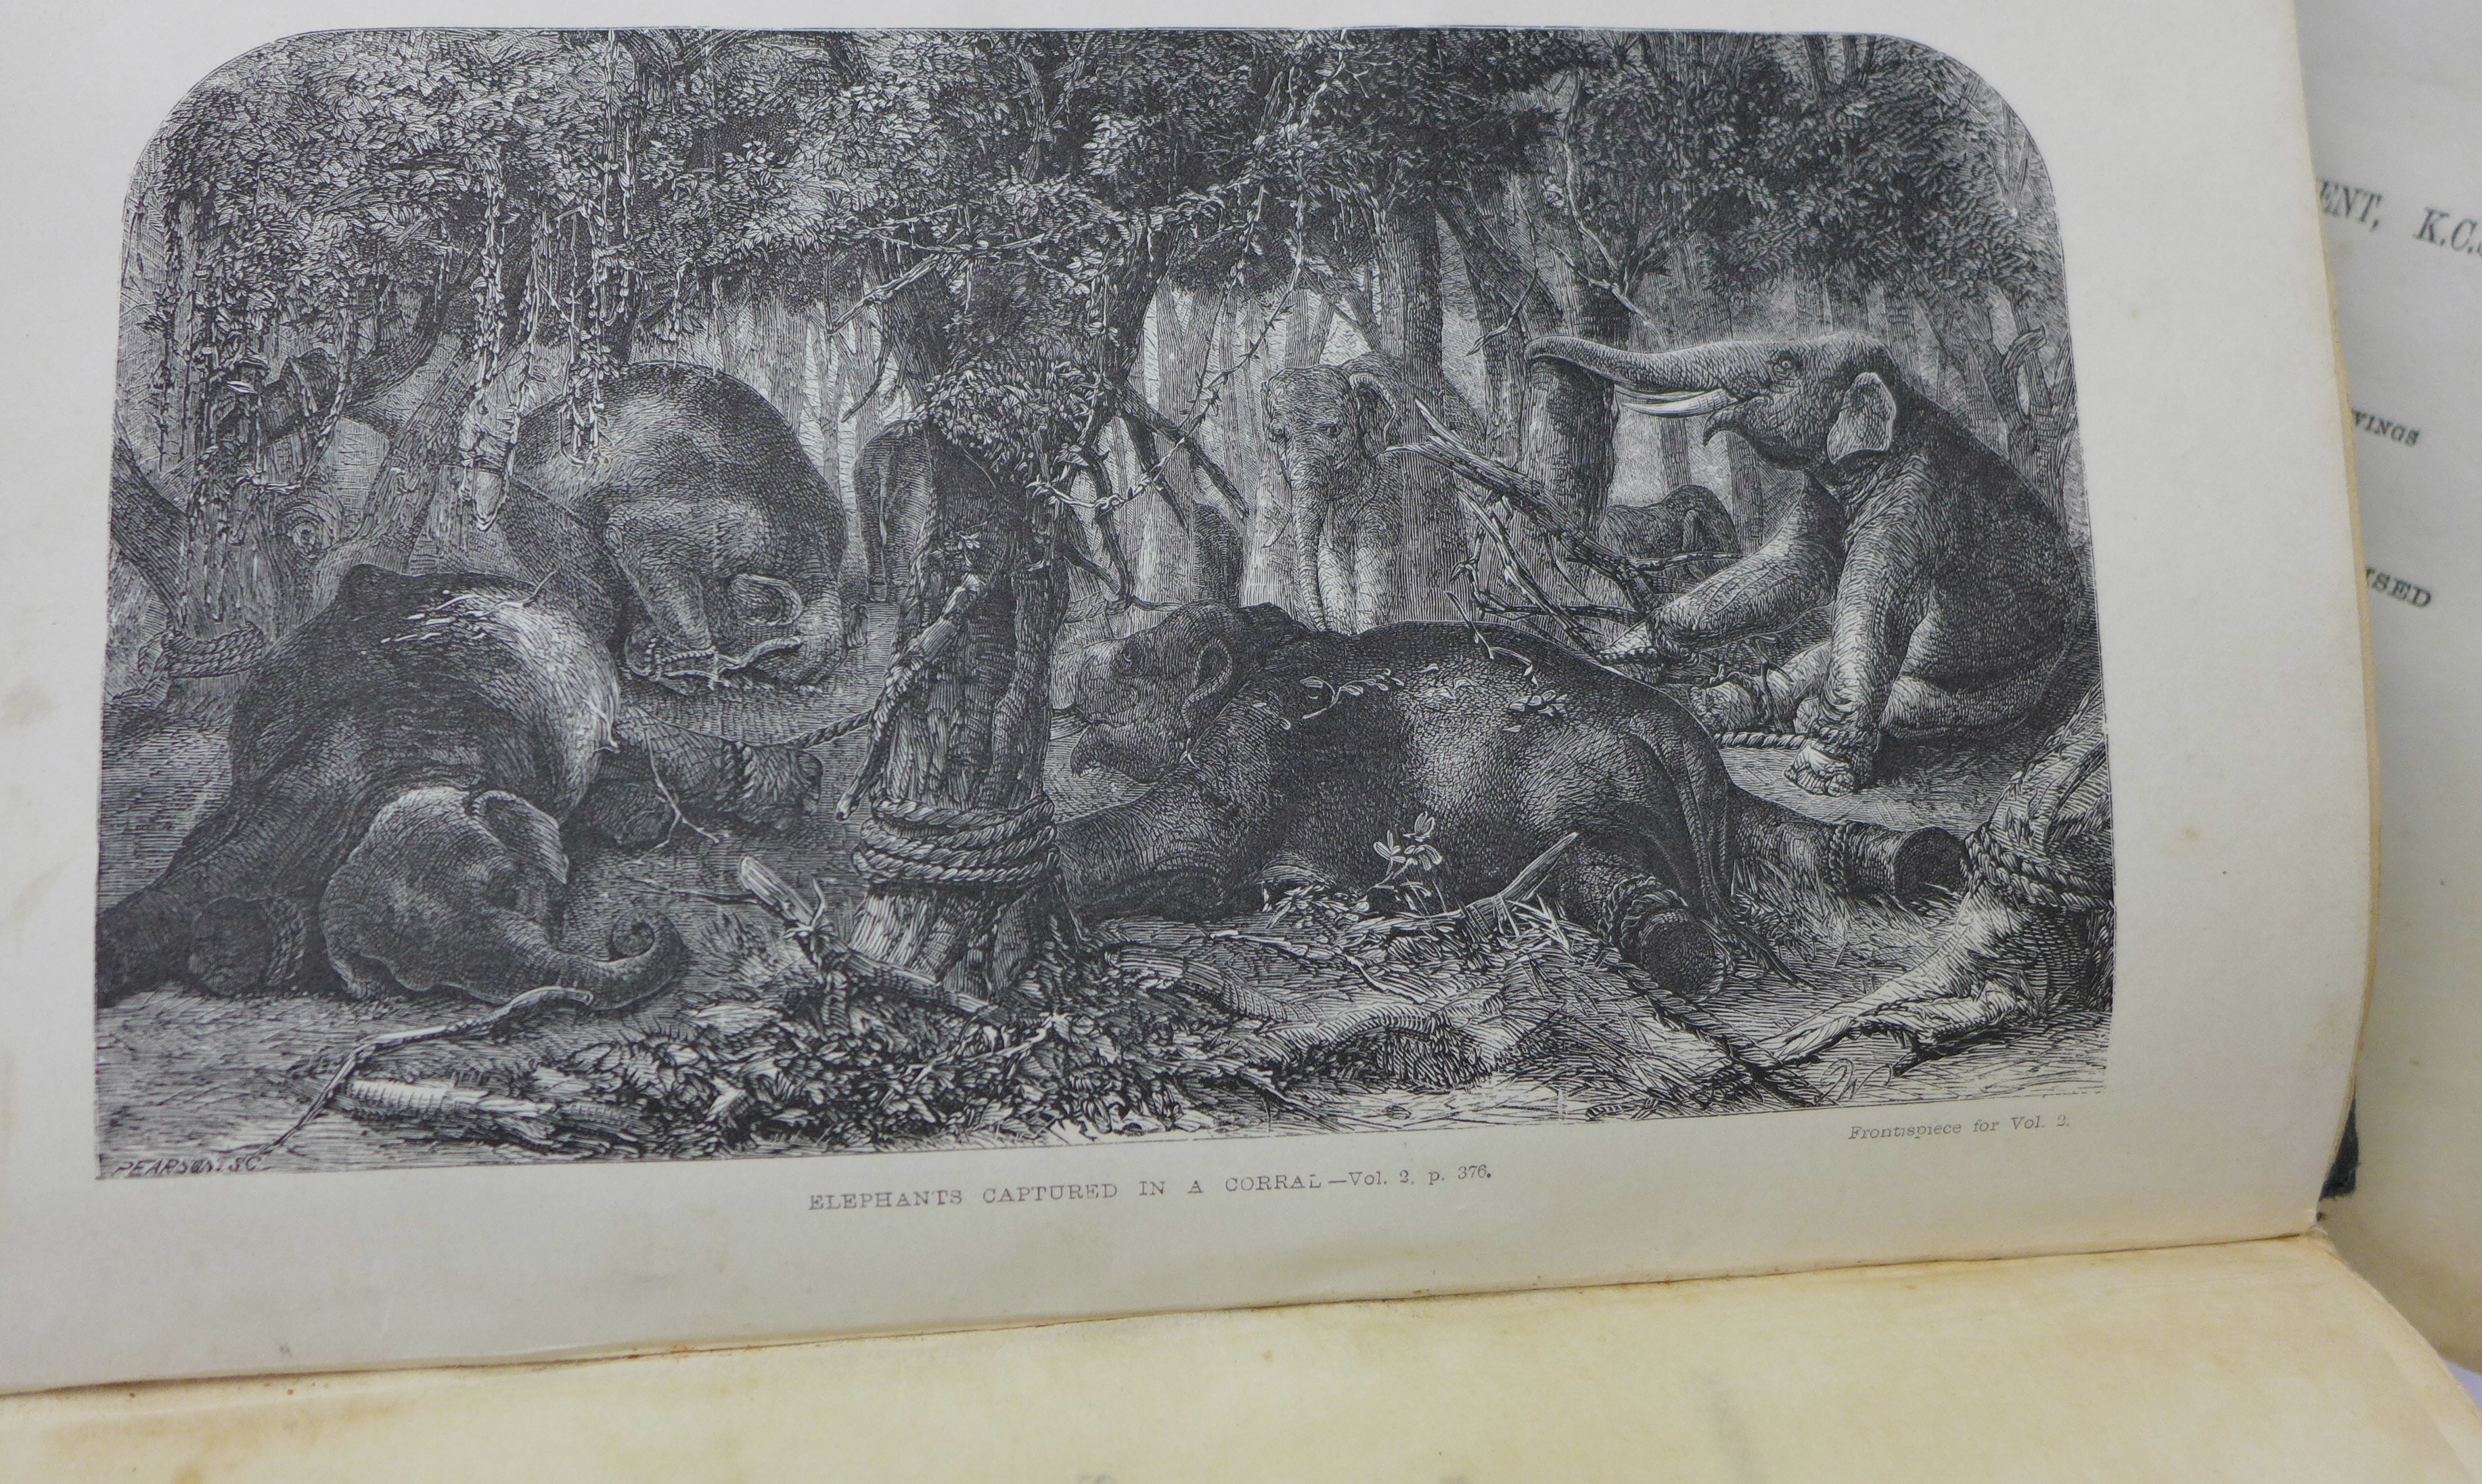 Two volumes, Ceylon by Emerson Tennent, 1860, published by Longman, Green, - Image 3 of 8